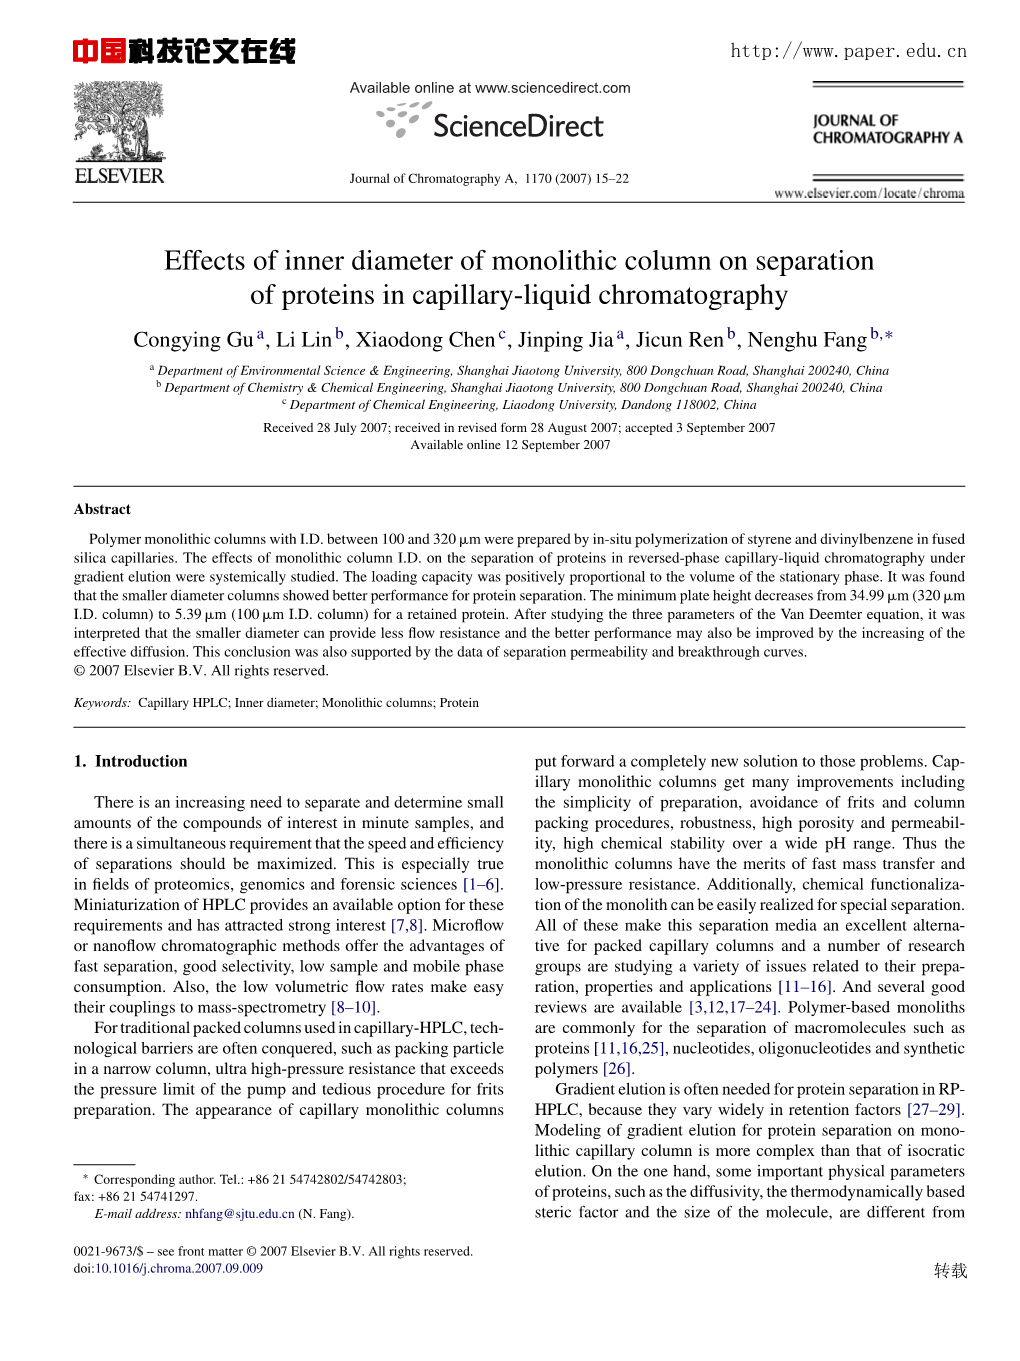 Effects of Inner Diameter of Monolithic Column on Separation of Proteins In